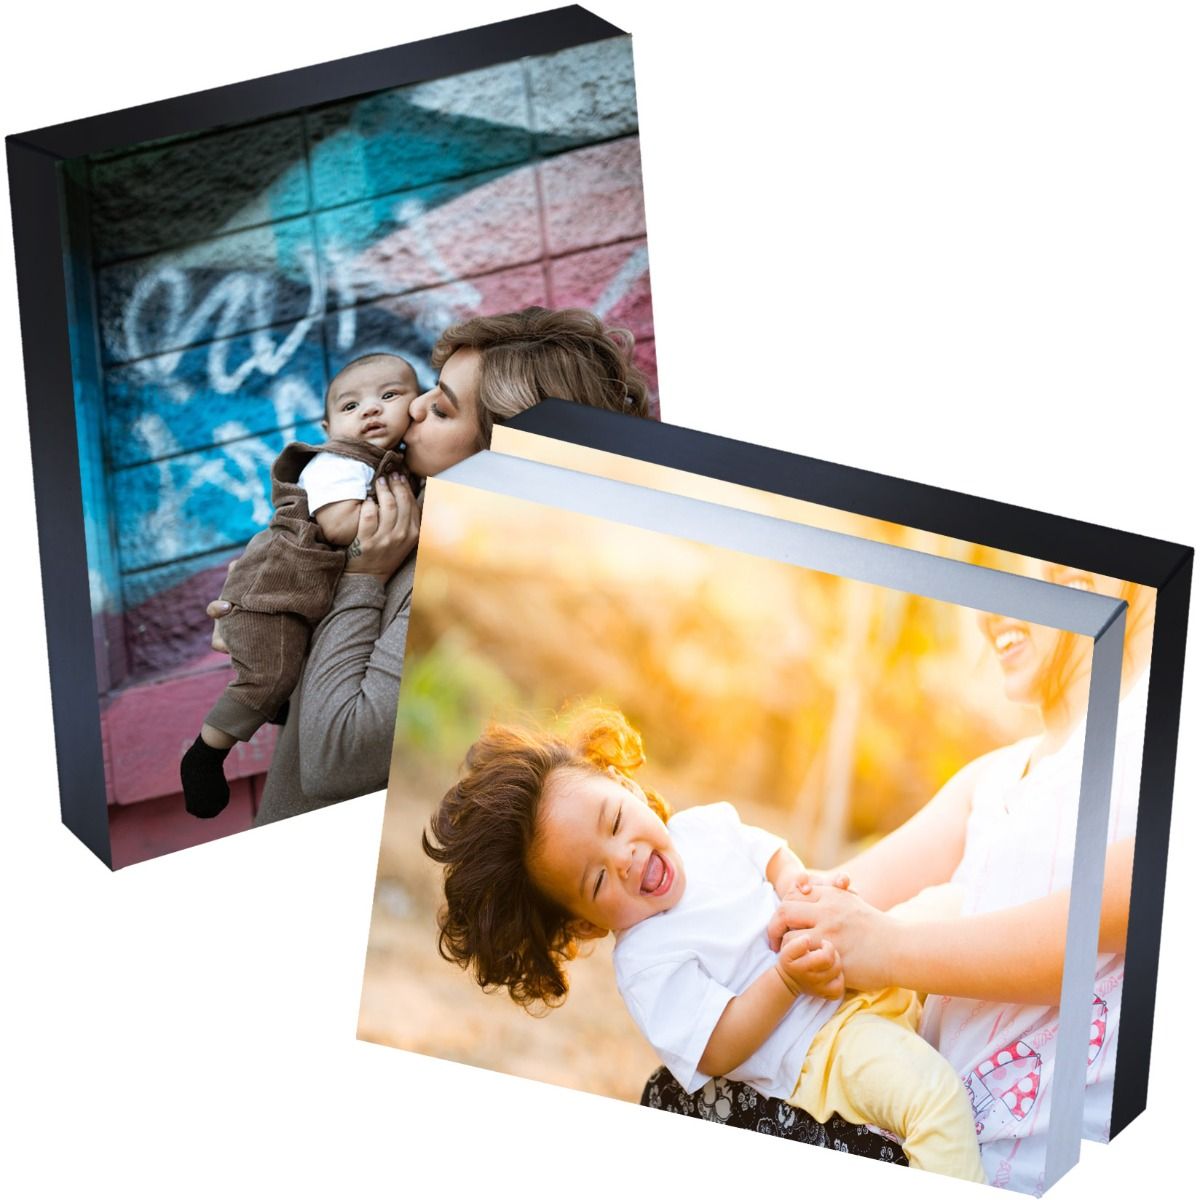 8" x 10" Silver Linings™ Peel-and-Stick Photo Block Frames, Choose from Silver, Gray, or Black Edge